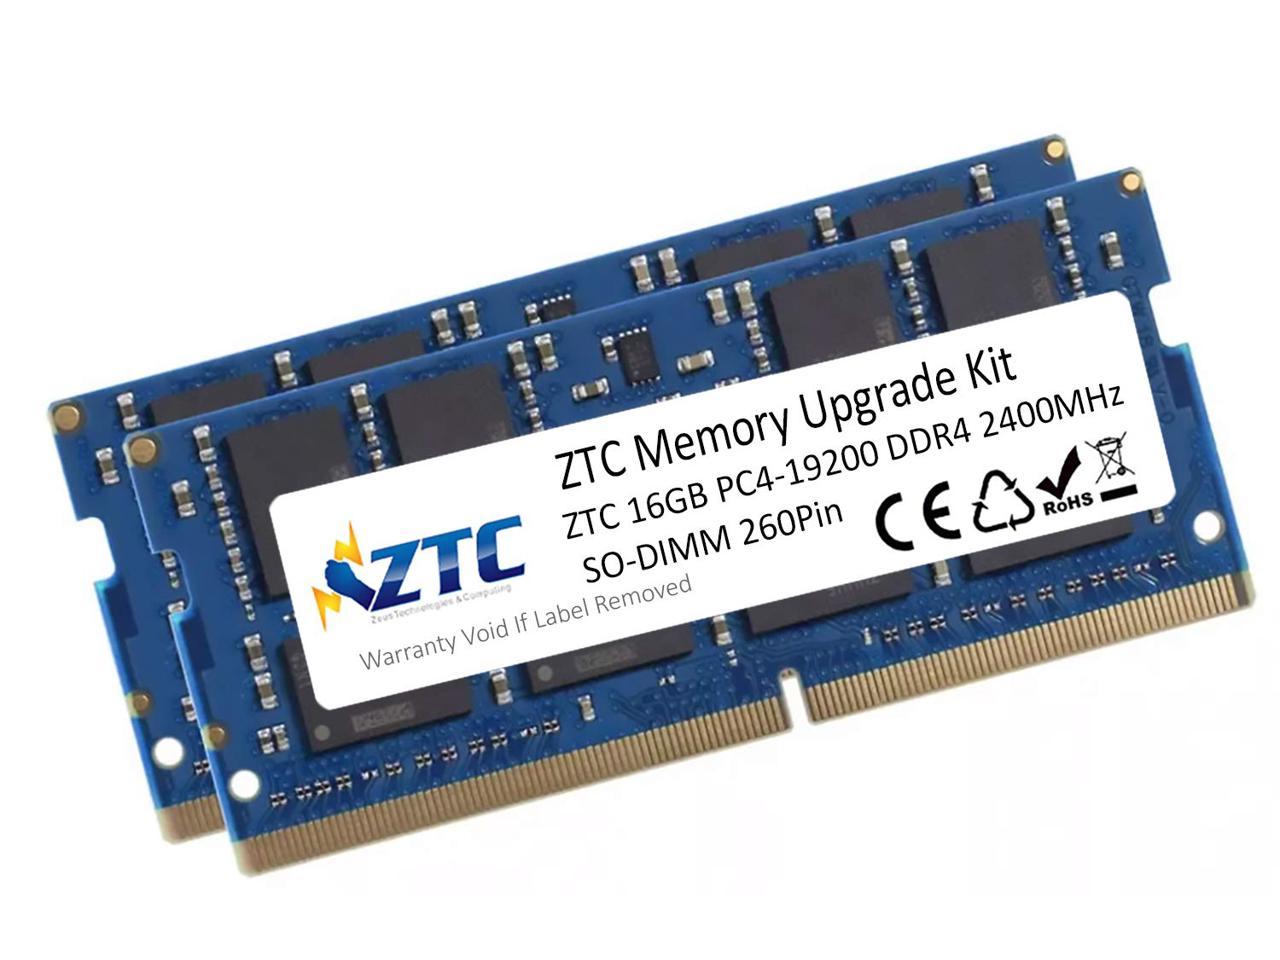 ZTC 16GB PC4-19200 DDR4 2400MHz SO-DIMM 260Pin CL17 Memory Upgrade for Mid 2017 iMac 27" w/Retina 5K Models and PCs which utilize